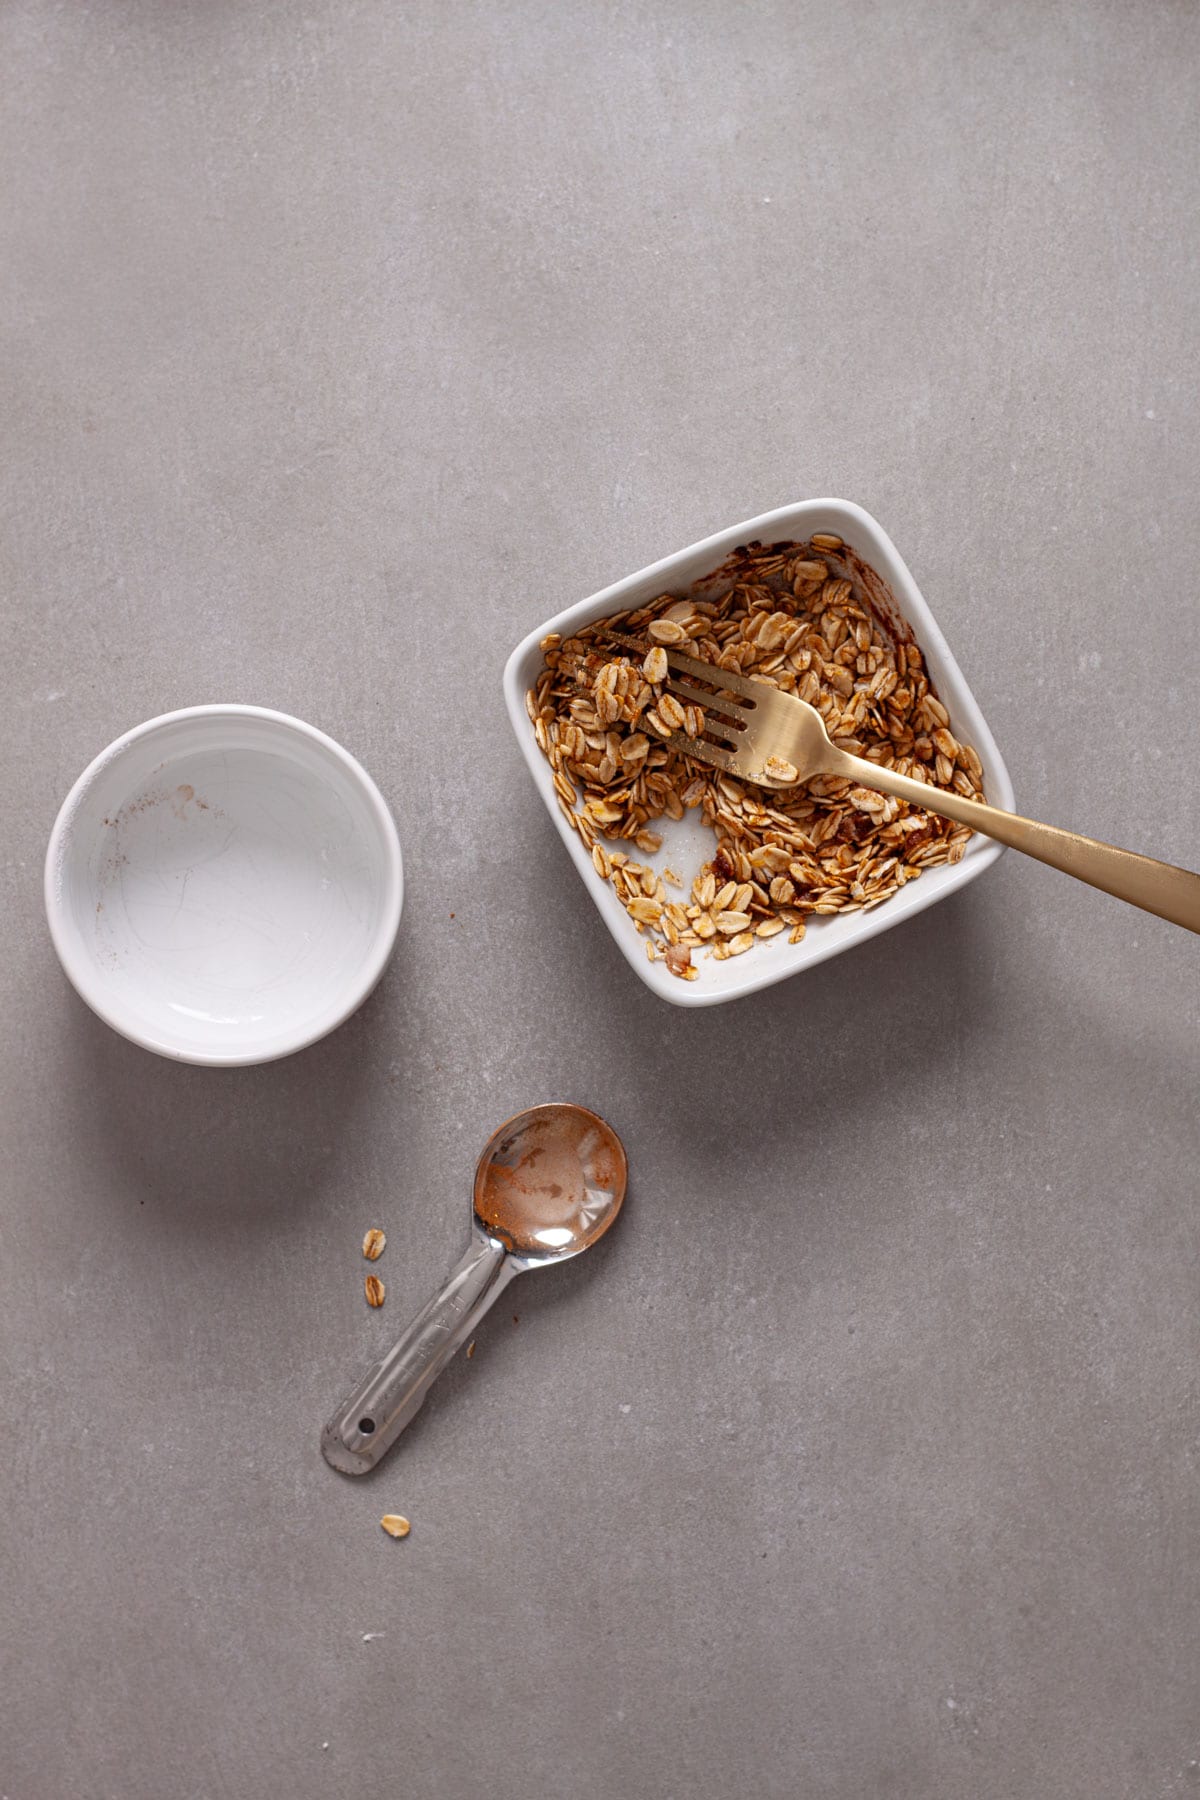 A crunchy oat topping for muffins getting stirred together in a small bowl.